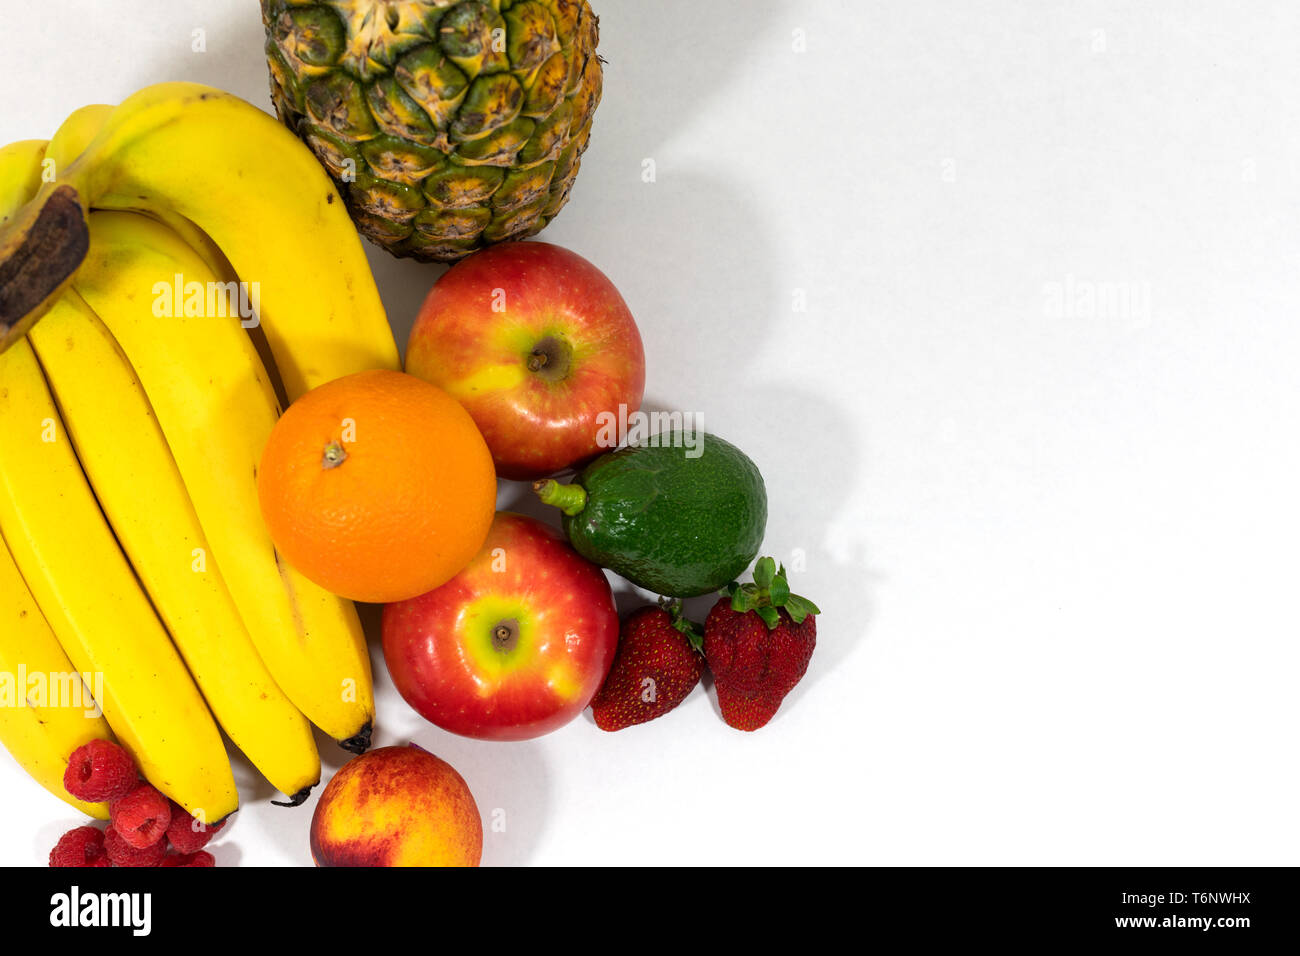 Arranged assortment of fresh, organic fruits. Vegan and clean eating lifestyles, promoting health and wellbeing, Vitamins and weight loss Stock Photo